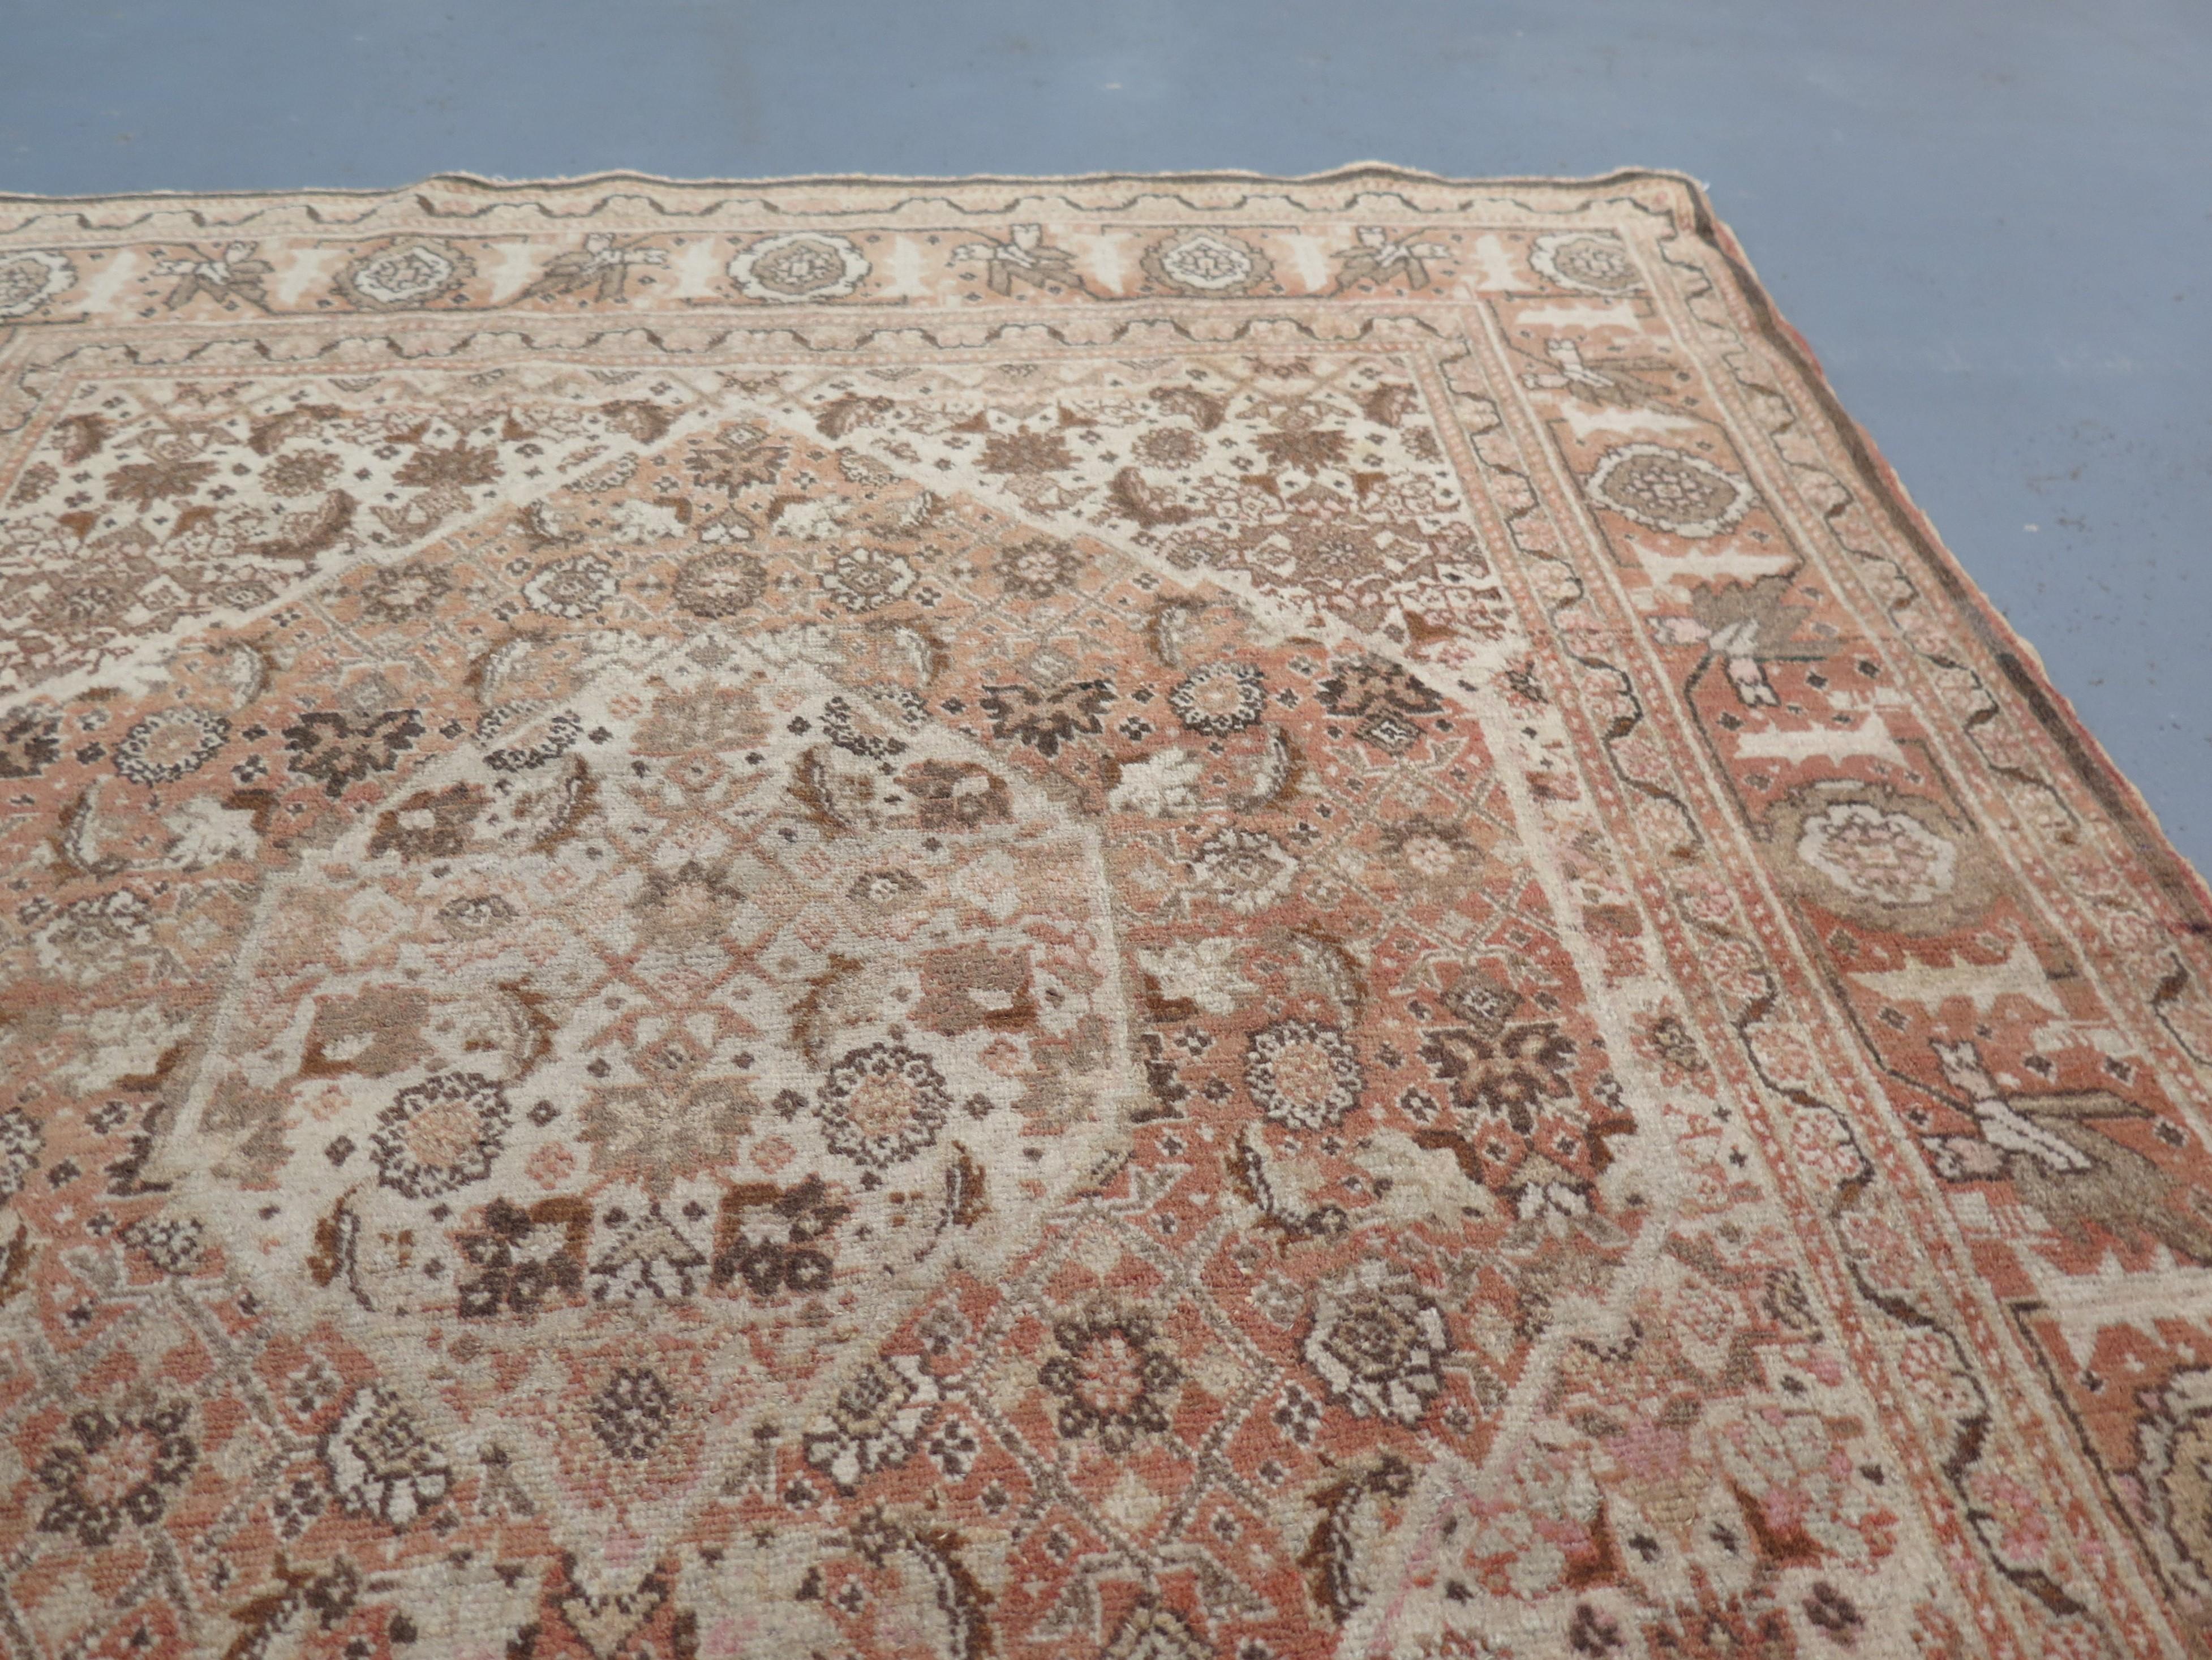 Antique Tabriz carpets are distinguished by their fine weaves and remarkable adherence to the traditions of Classical Persian rug design. This elegant c. 1890s example is associated with the Master weaver, Hadji Jalili, well known as the artist